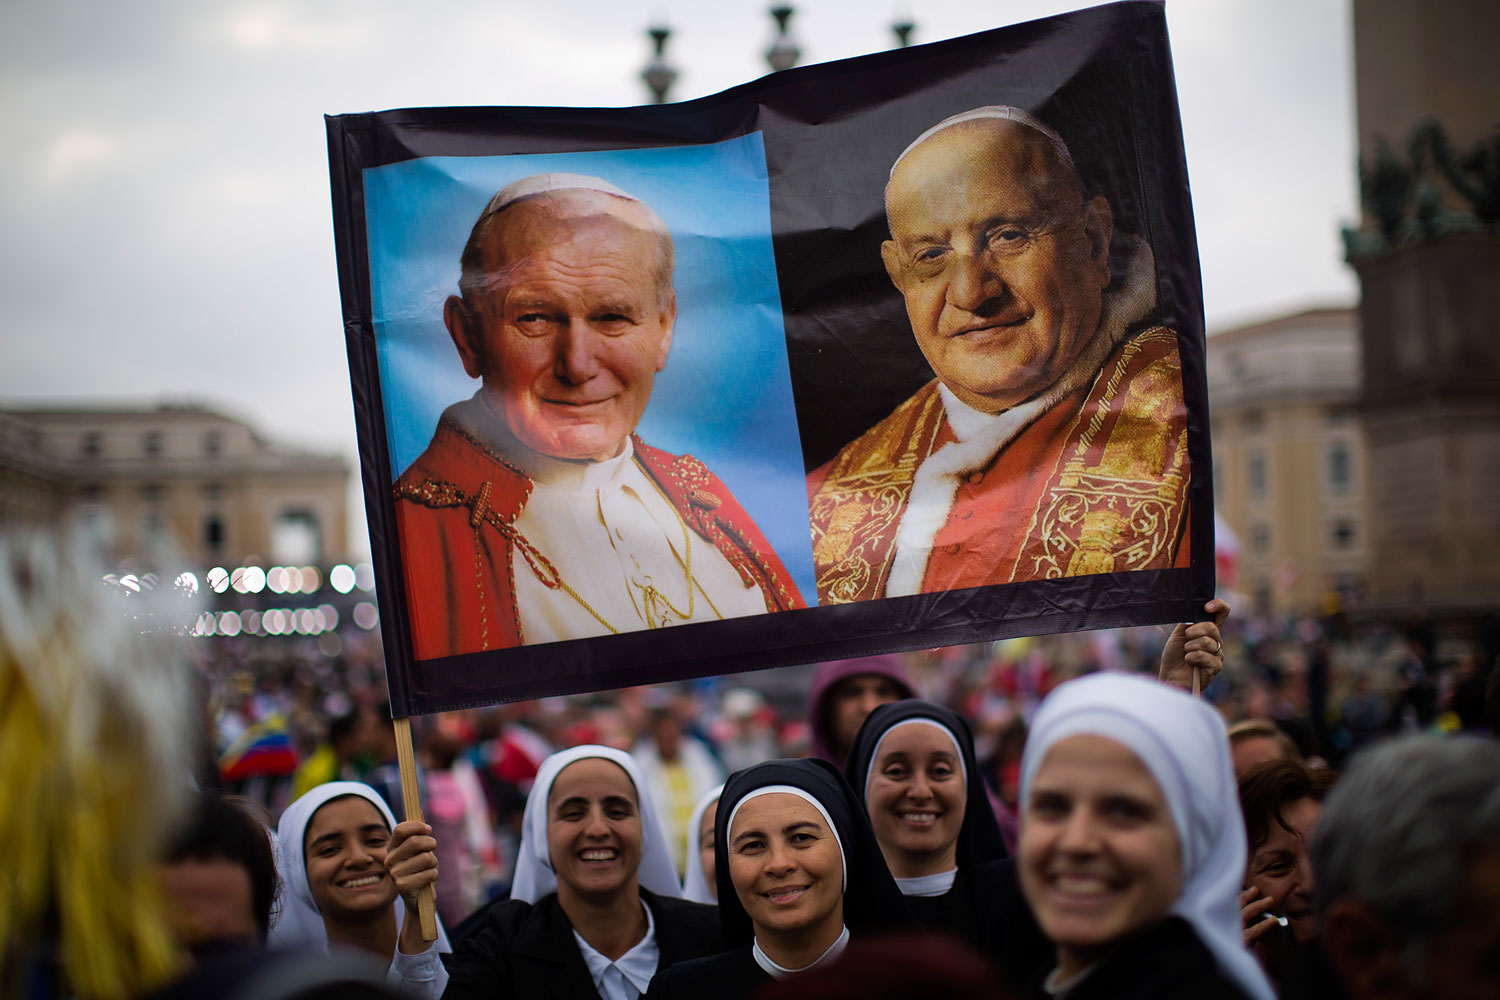 Nuns hold up a poster with portraits of  Pope John Paul II, left, and John XXIII, in St. Peter's Square at the Vatican, April 27, 2014.